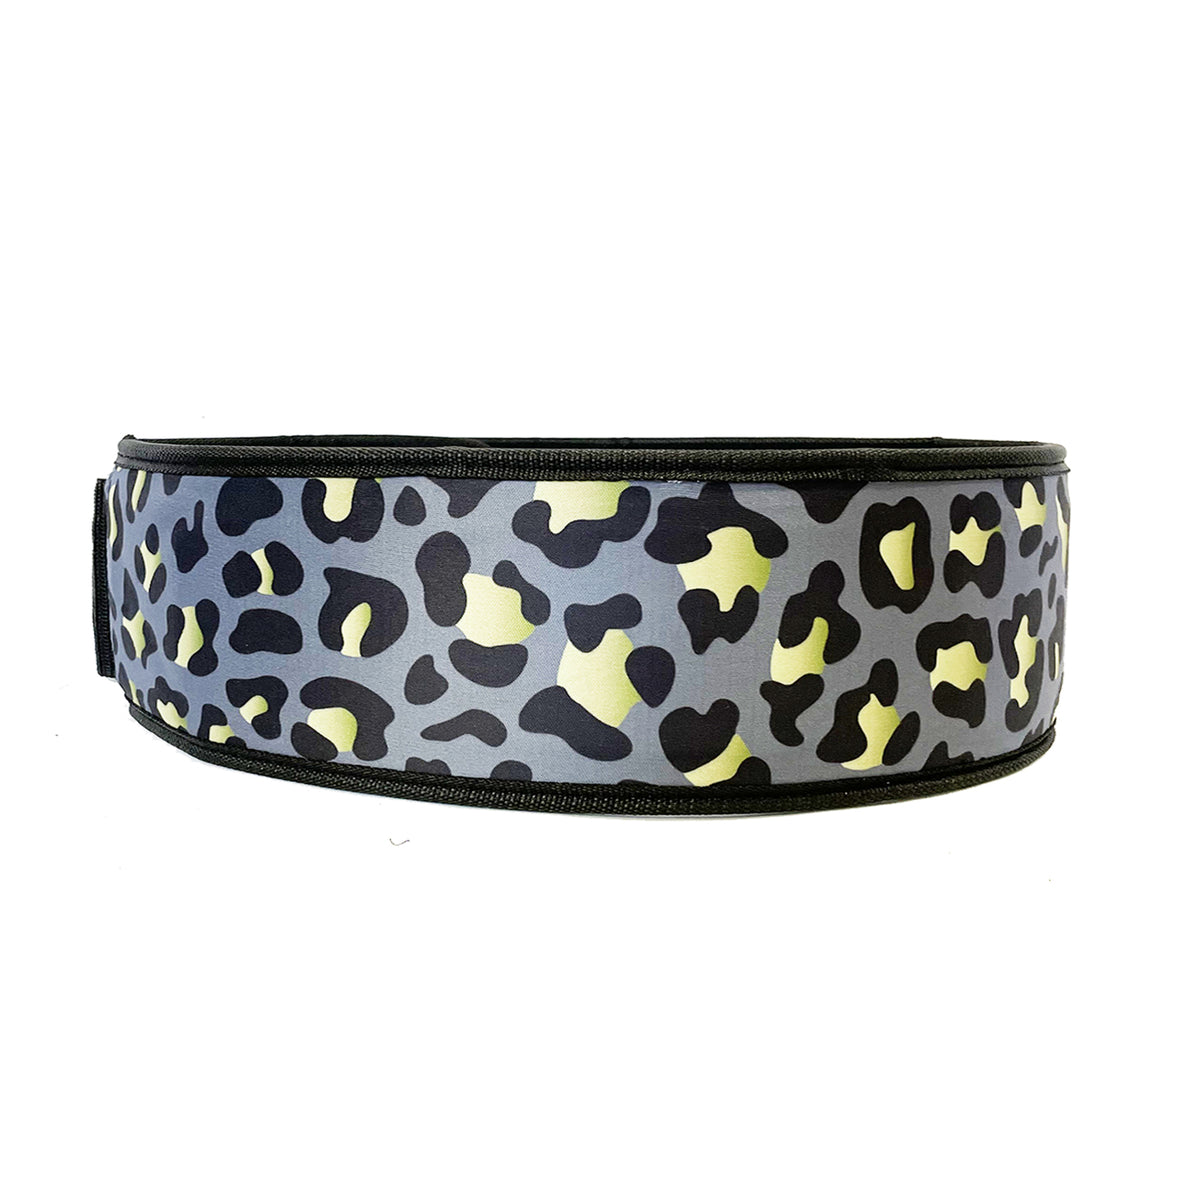 Leopard Cheetah Print Lifting Belt for CrossFit and Lifting Workouts